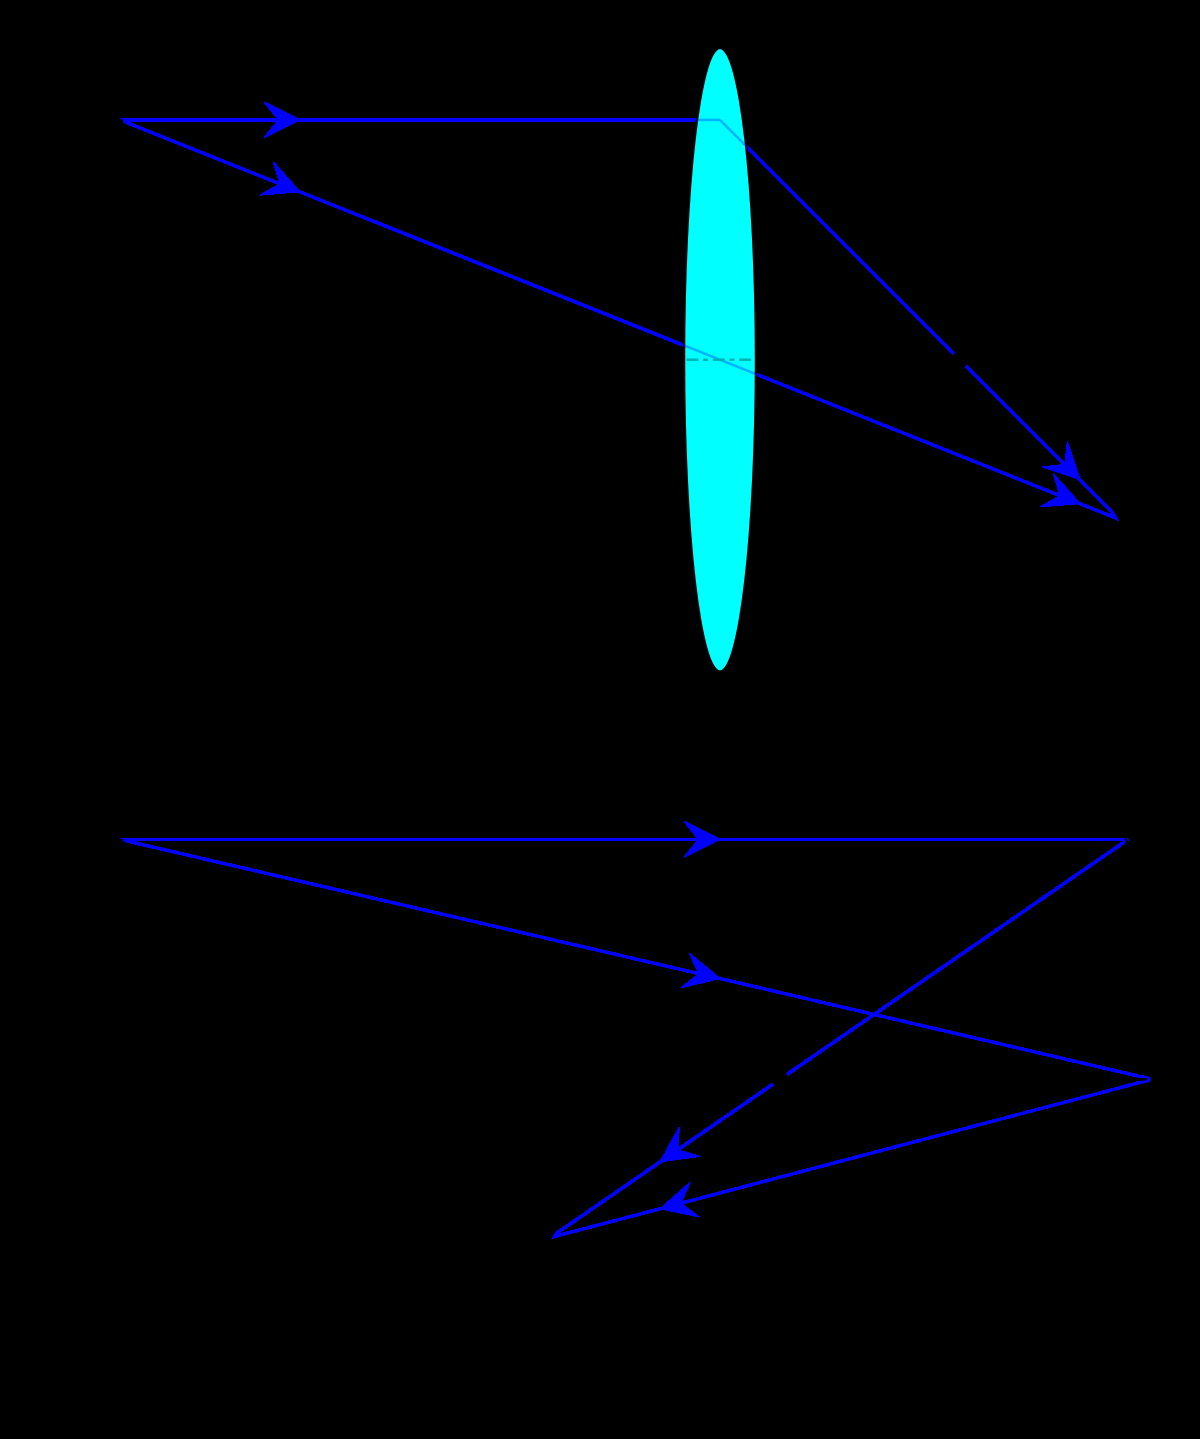 Concave Mirror Ray Diagram Real Image Wikipedia